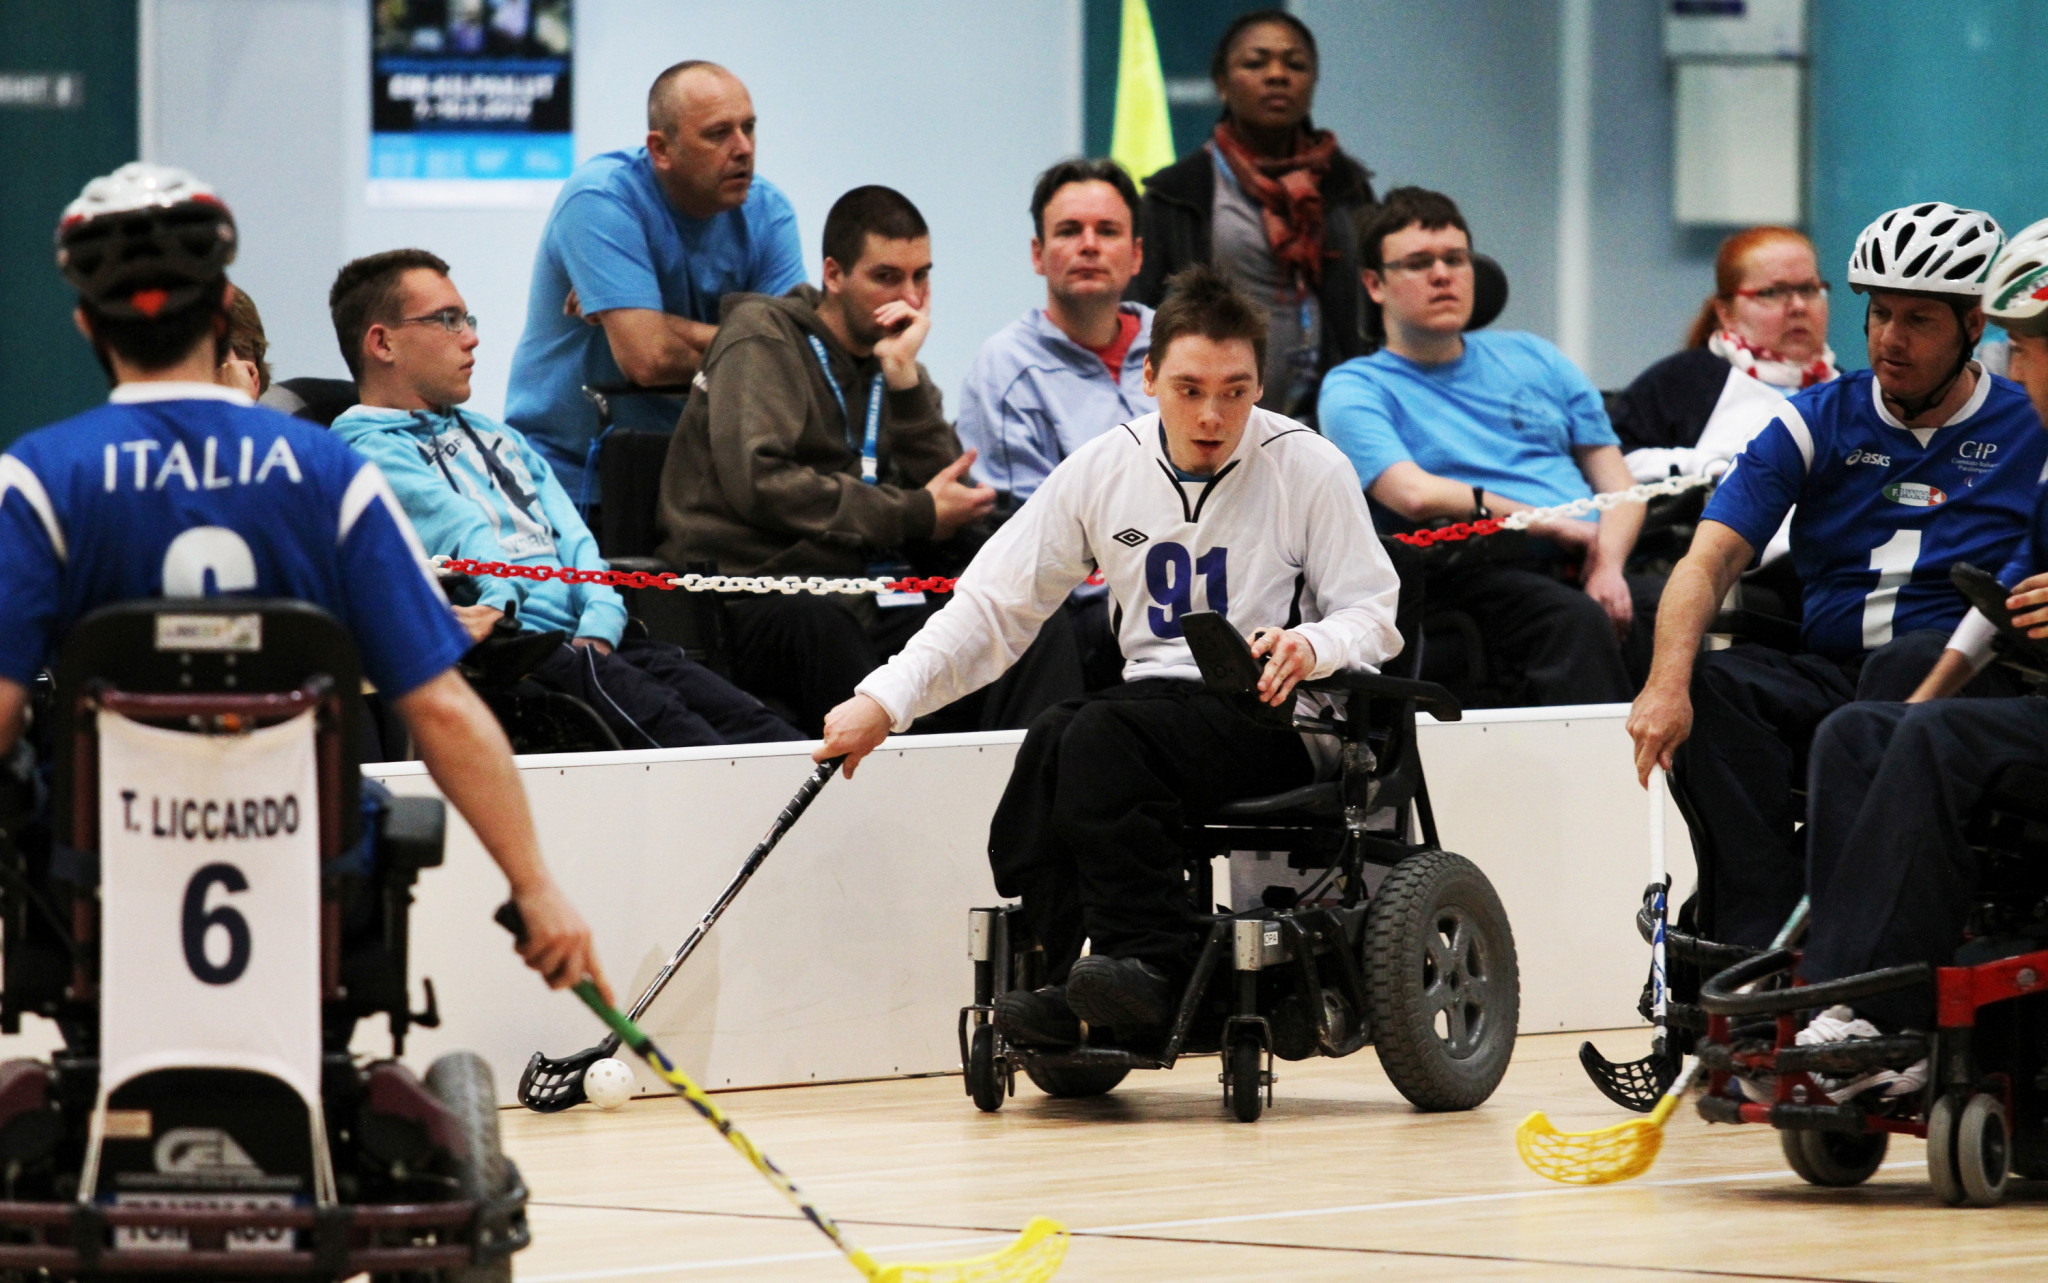 Powerchair Hockey European Championships cancelled due to COVID-19 pandemic